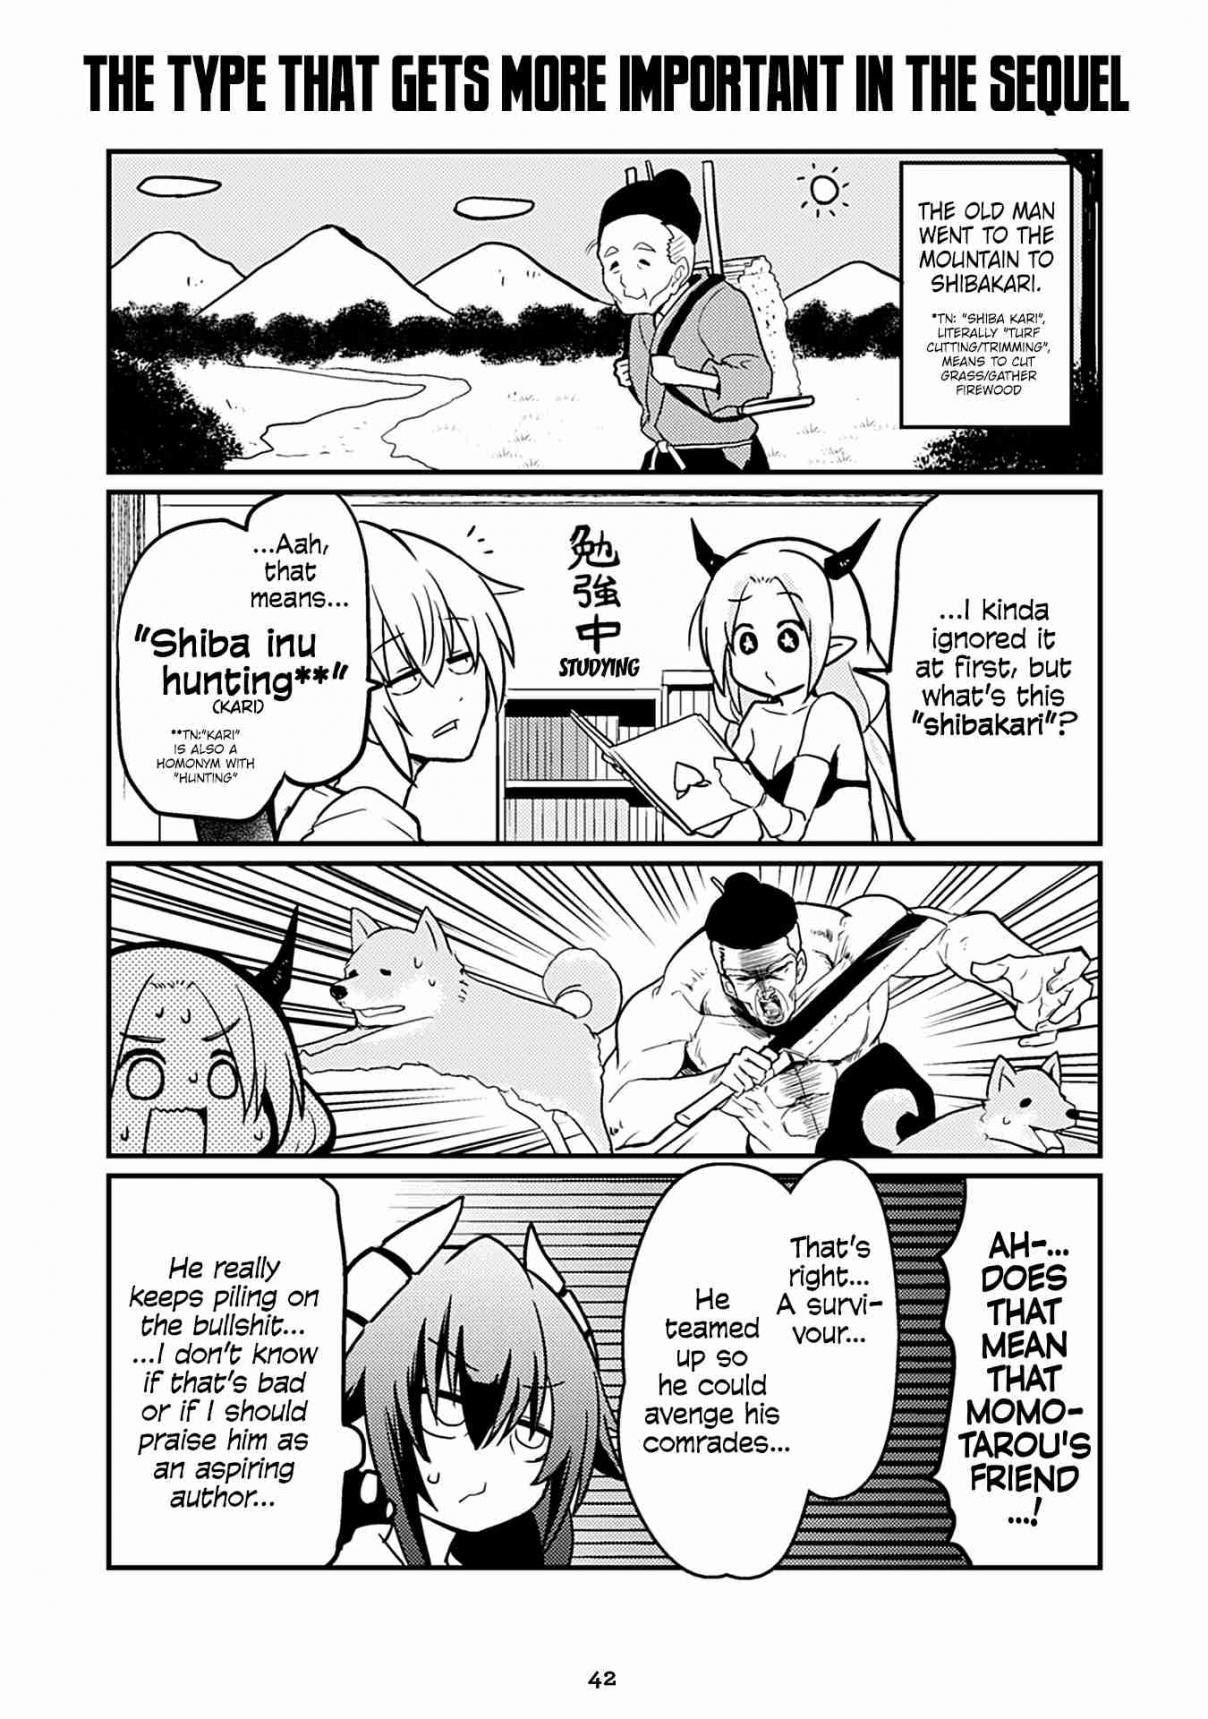 Naughty Succubus "Saki chan" Vol. 2 Ch. 134 The type that gets more important in the sequel